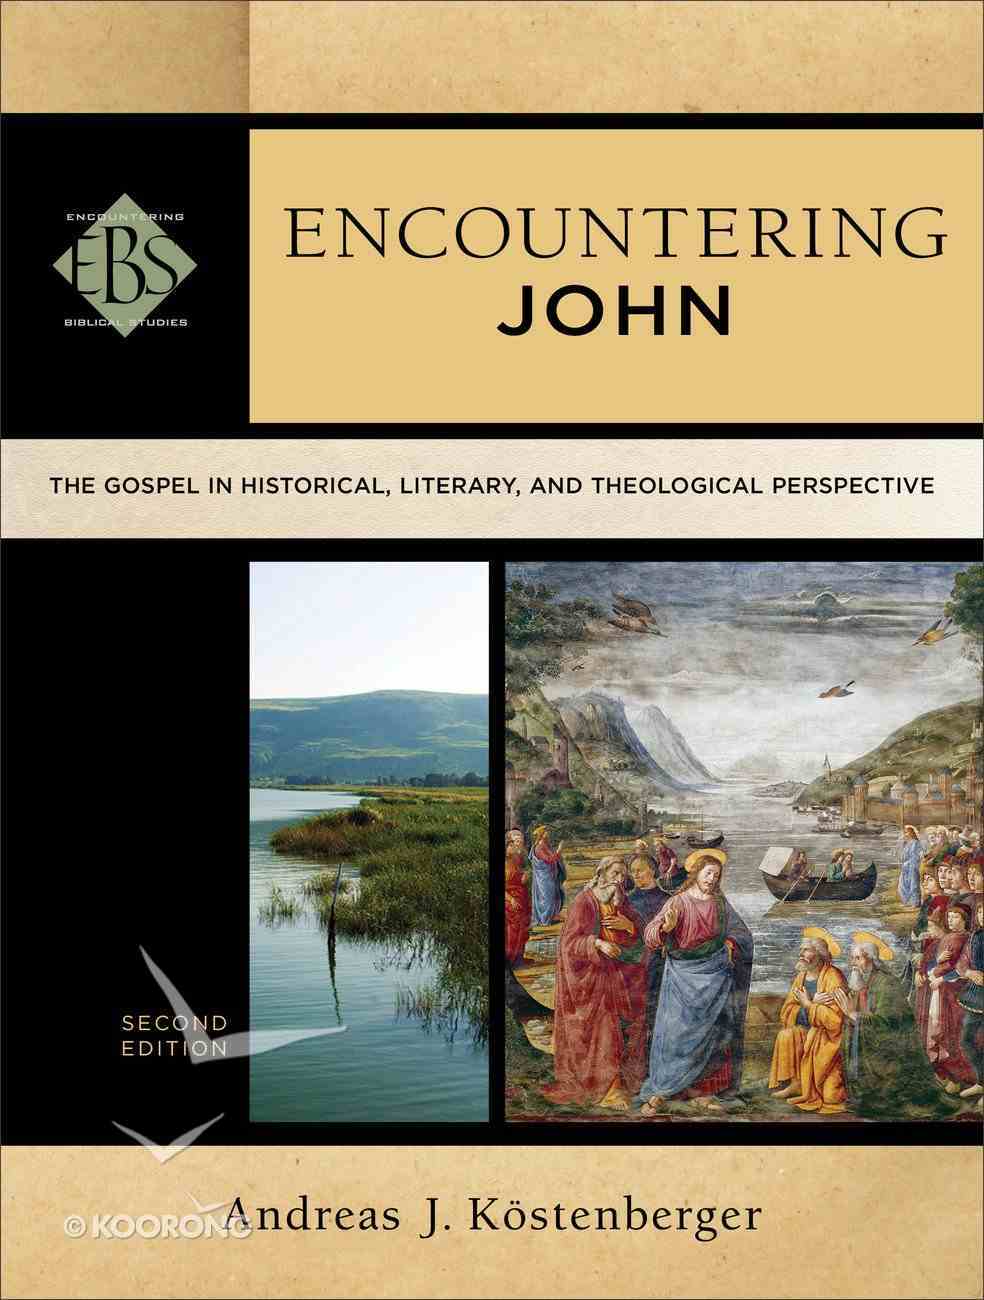 Encountering John : The Gospel in Historical, Literary, and Theological Perspective (2nd Edition) (Encountering Biblical Studies Series) Paperback